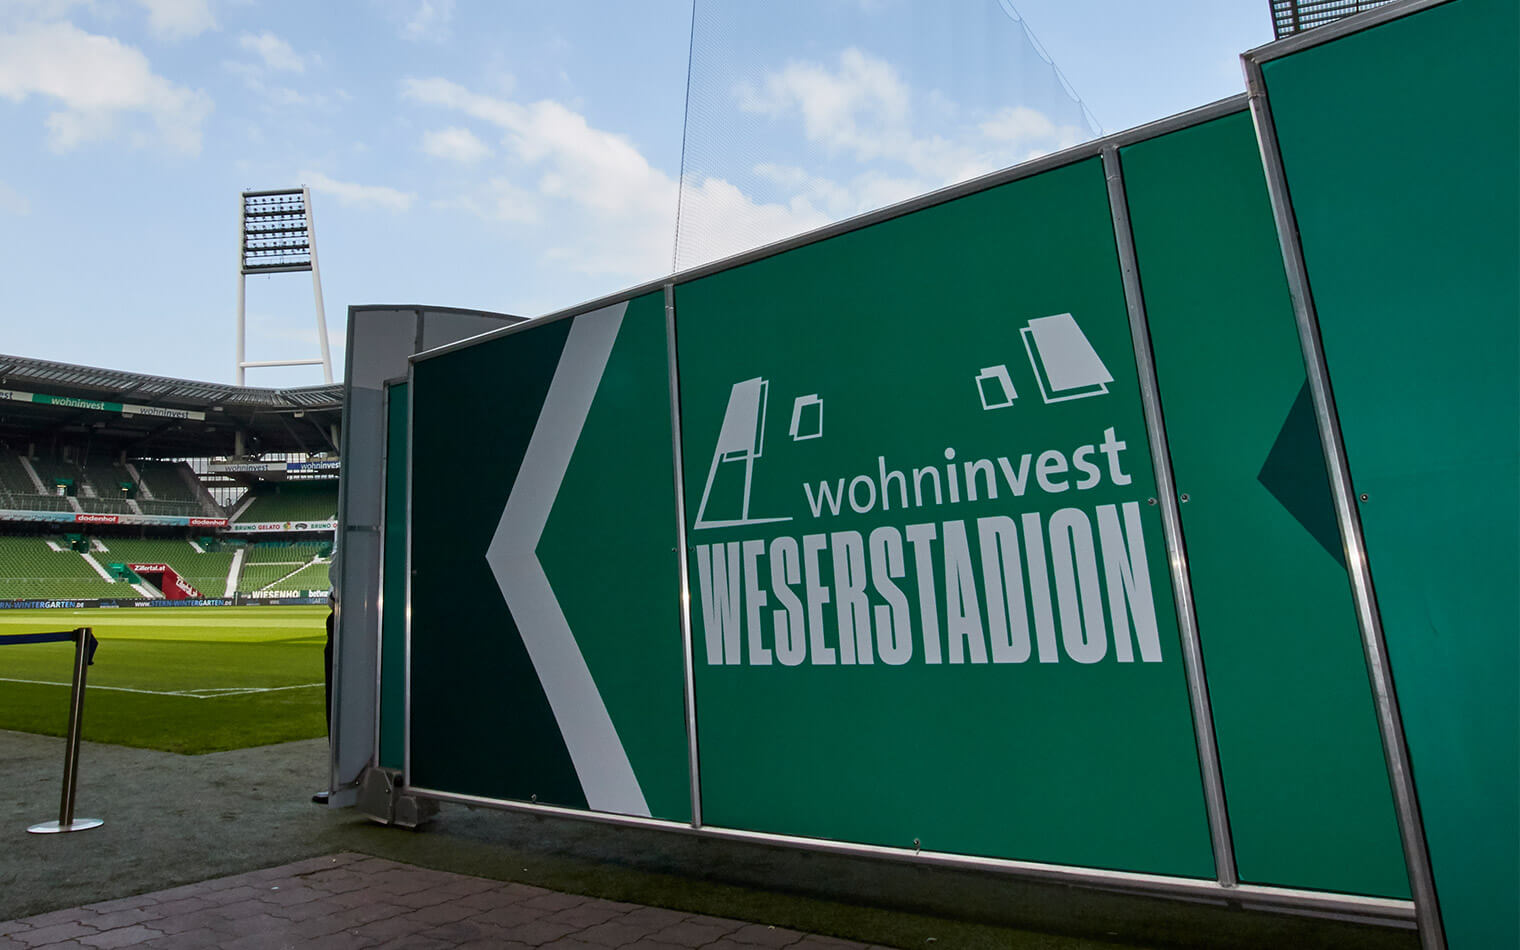 This picture shows the players' tunnel with the logo of the wohninvest WESERSTADION.